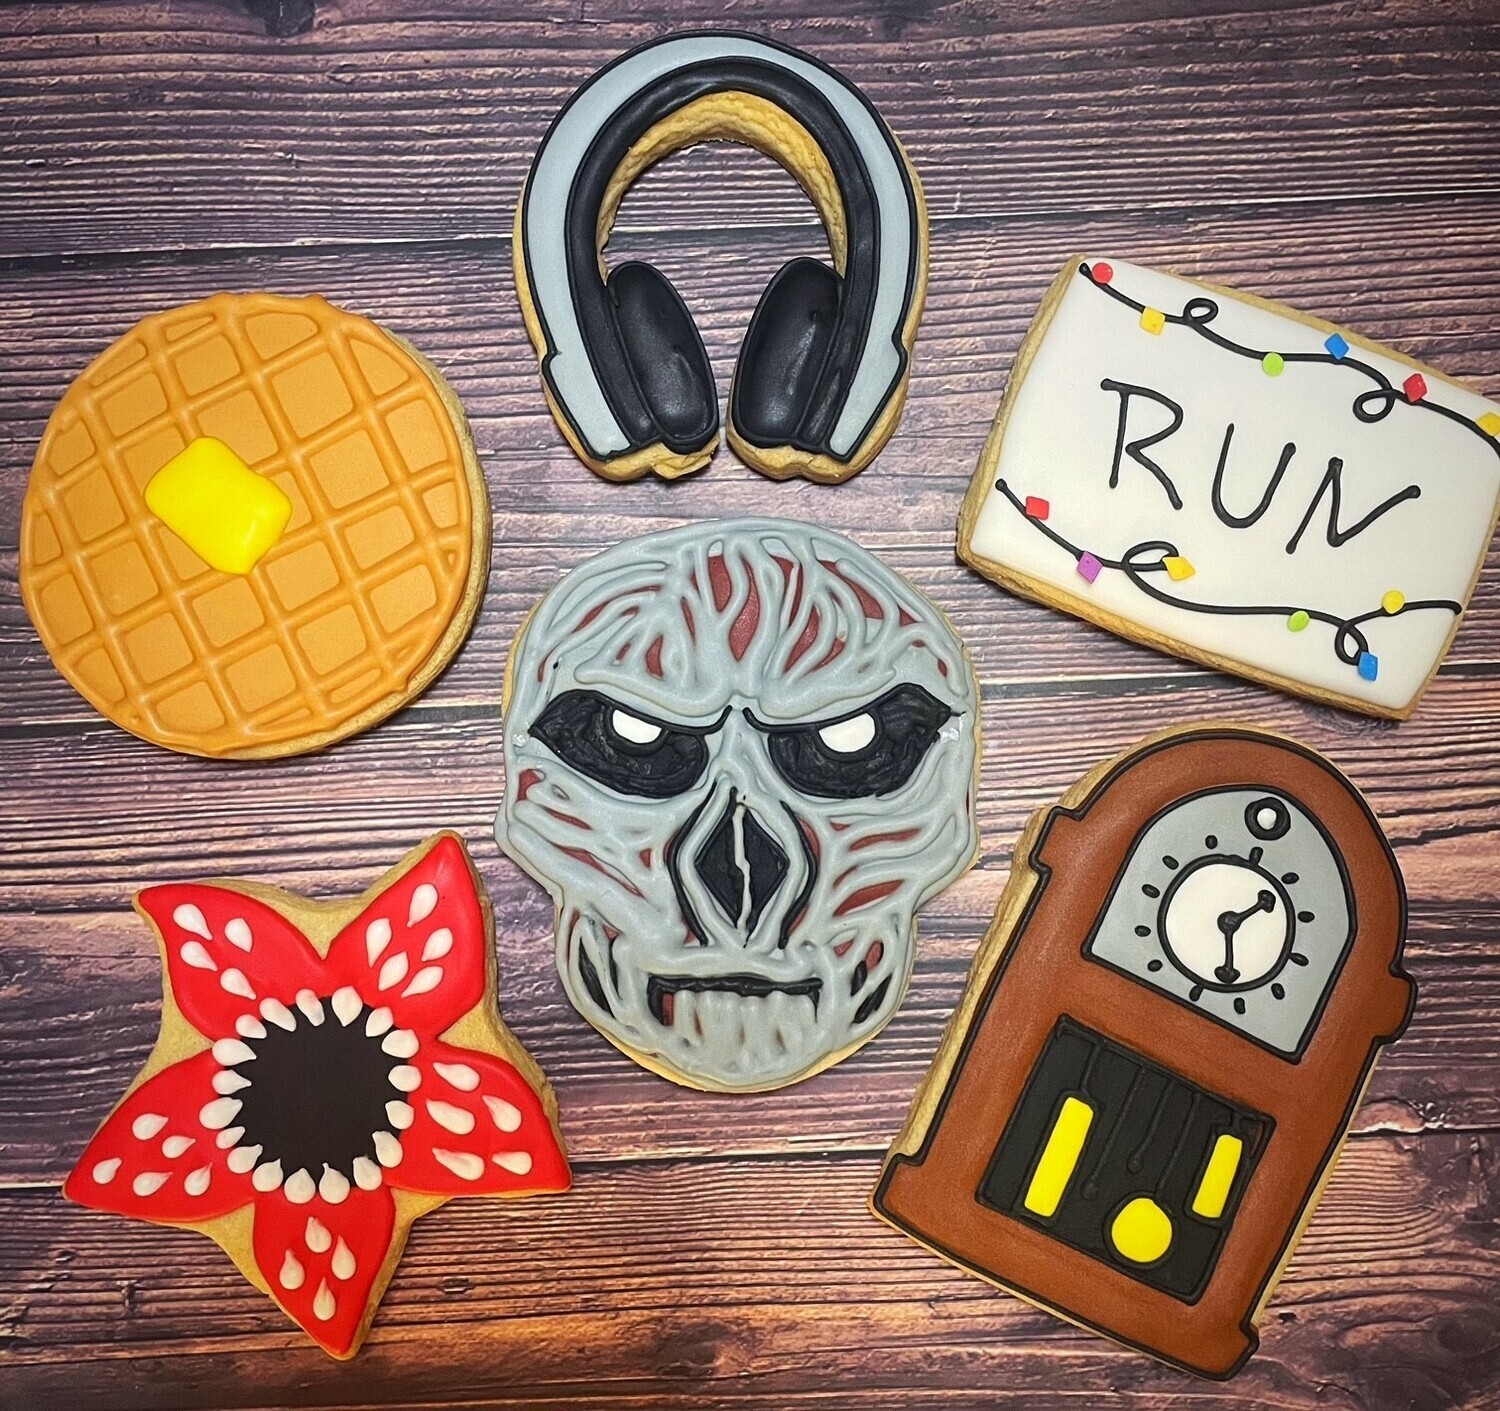 'STRANGER THINGS Decorating Workshop - SATURDAY, OCT 1st at 4:30 p.m.